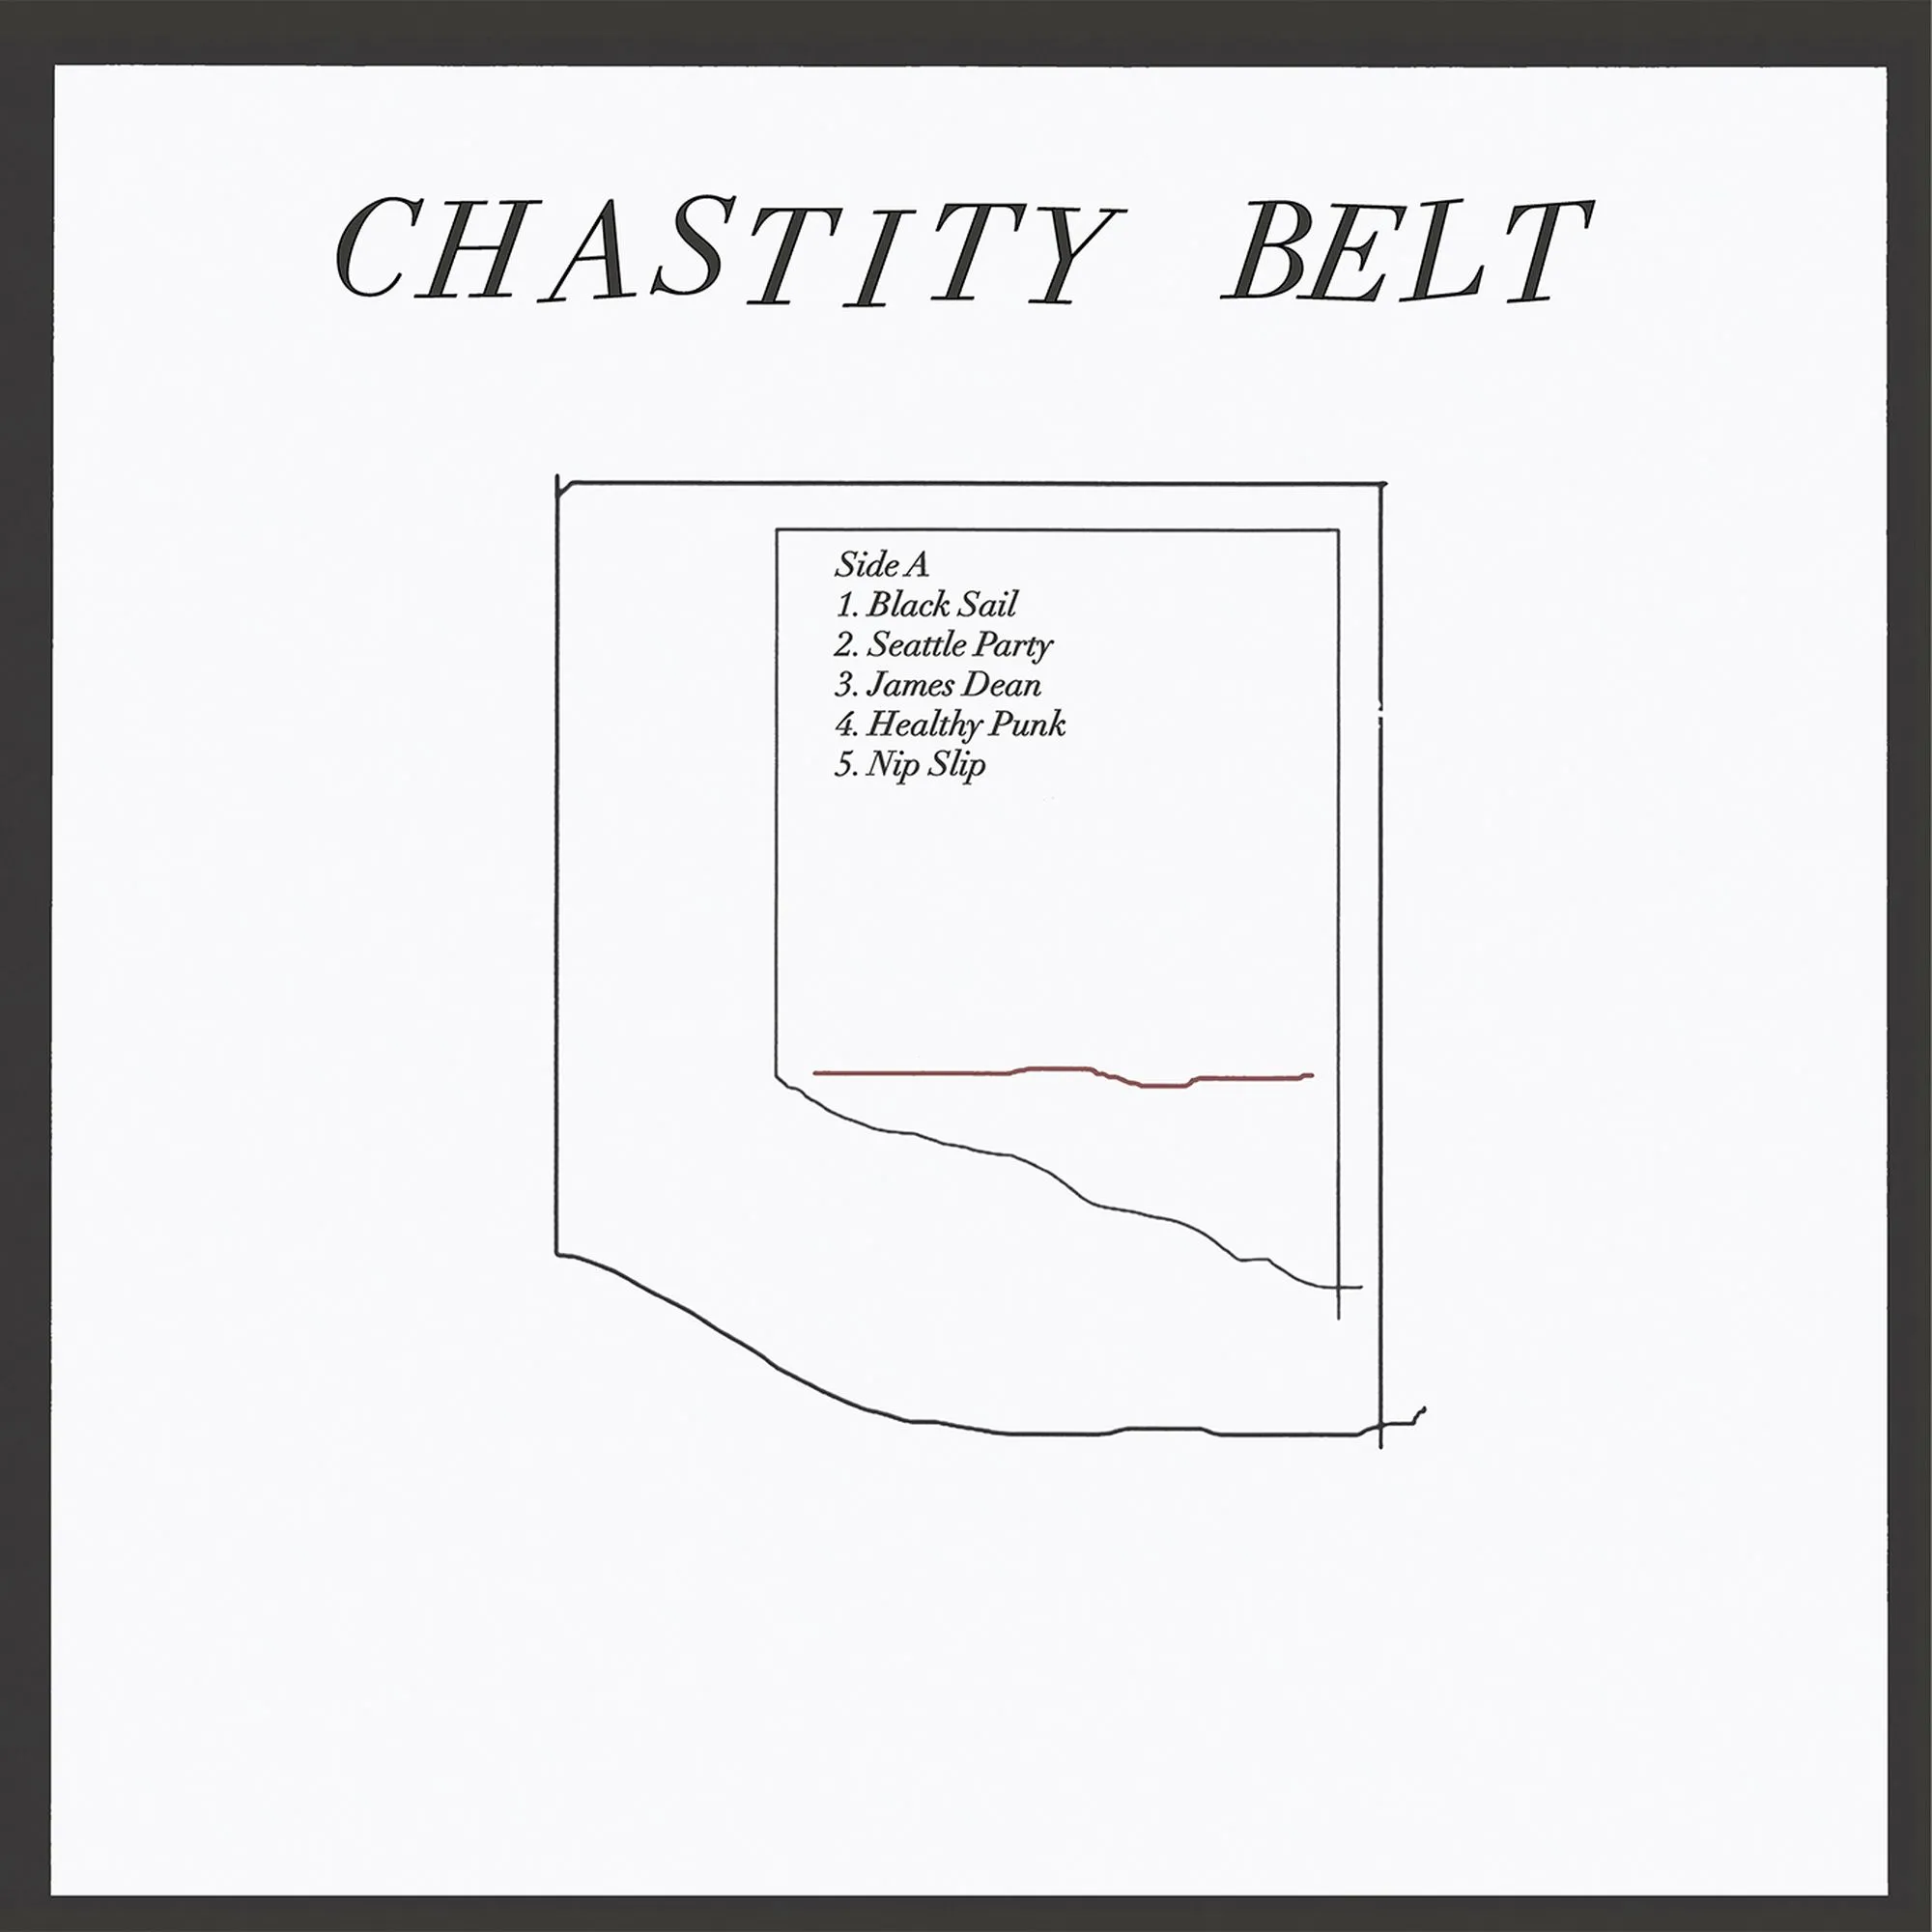 <strong>Chastity Belt - No Regerts (10th Anniversary Edition)</strong> (Vinyl LP - white)